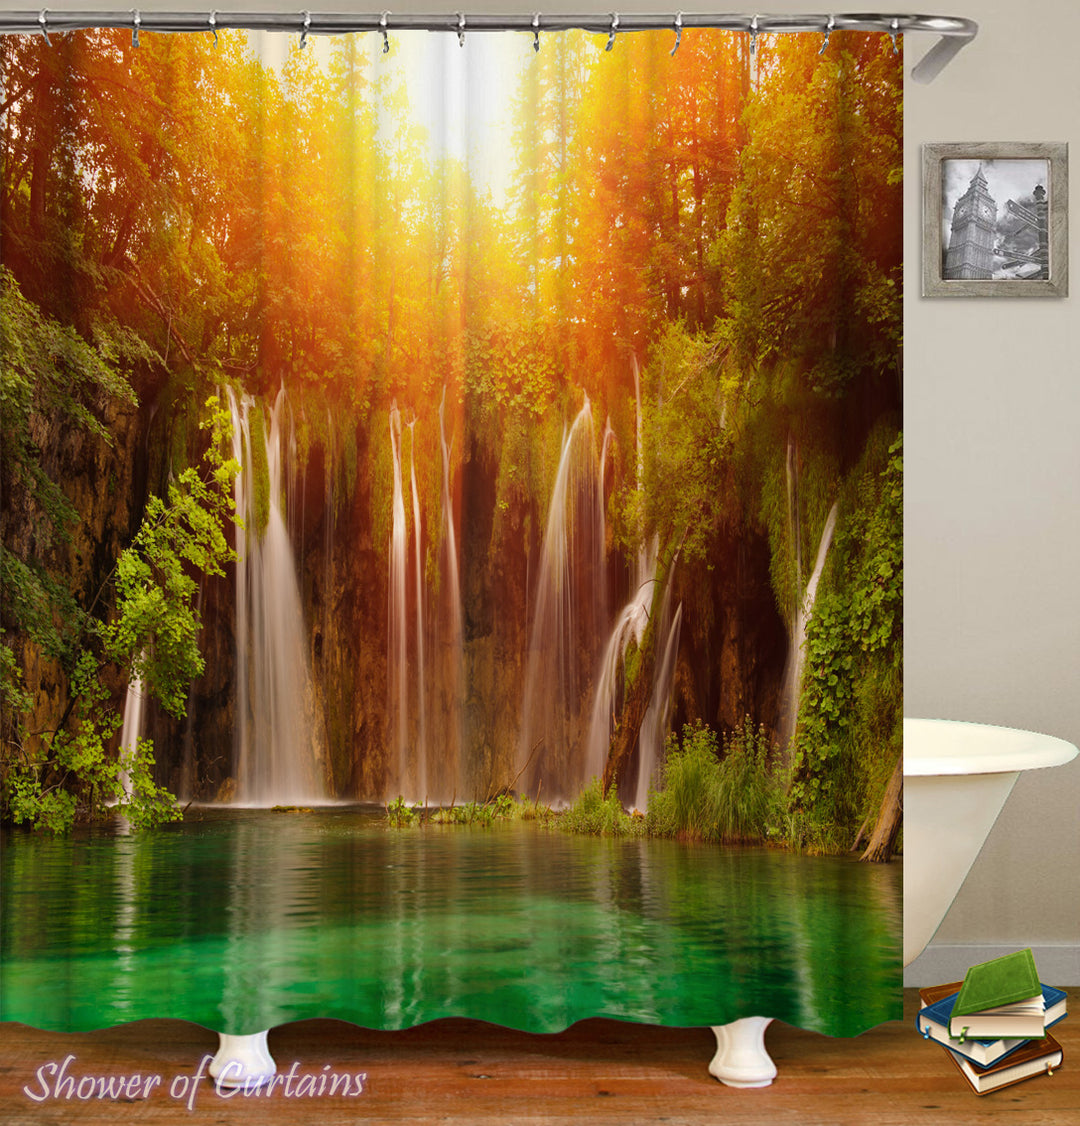 Tropical shower curtain - Sunset Over The Hidden Lake shower curtain